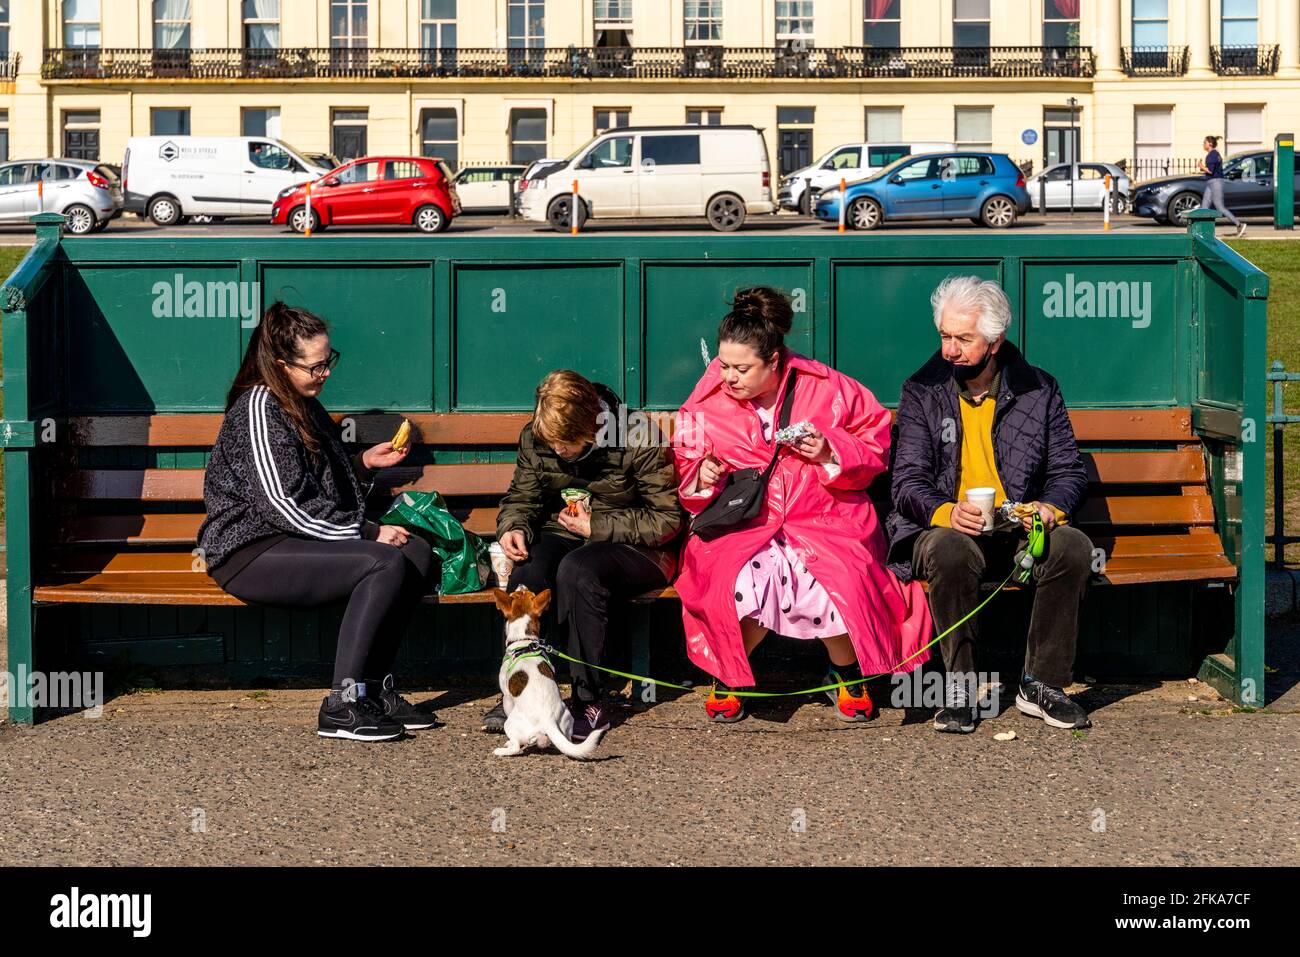 A Group Of Local People Enjoying The Sunshine On Hove Seafront, Brighton, East Sussex, UK. Stock Photo